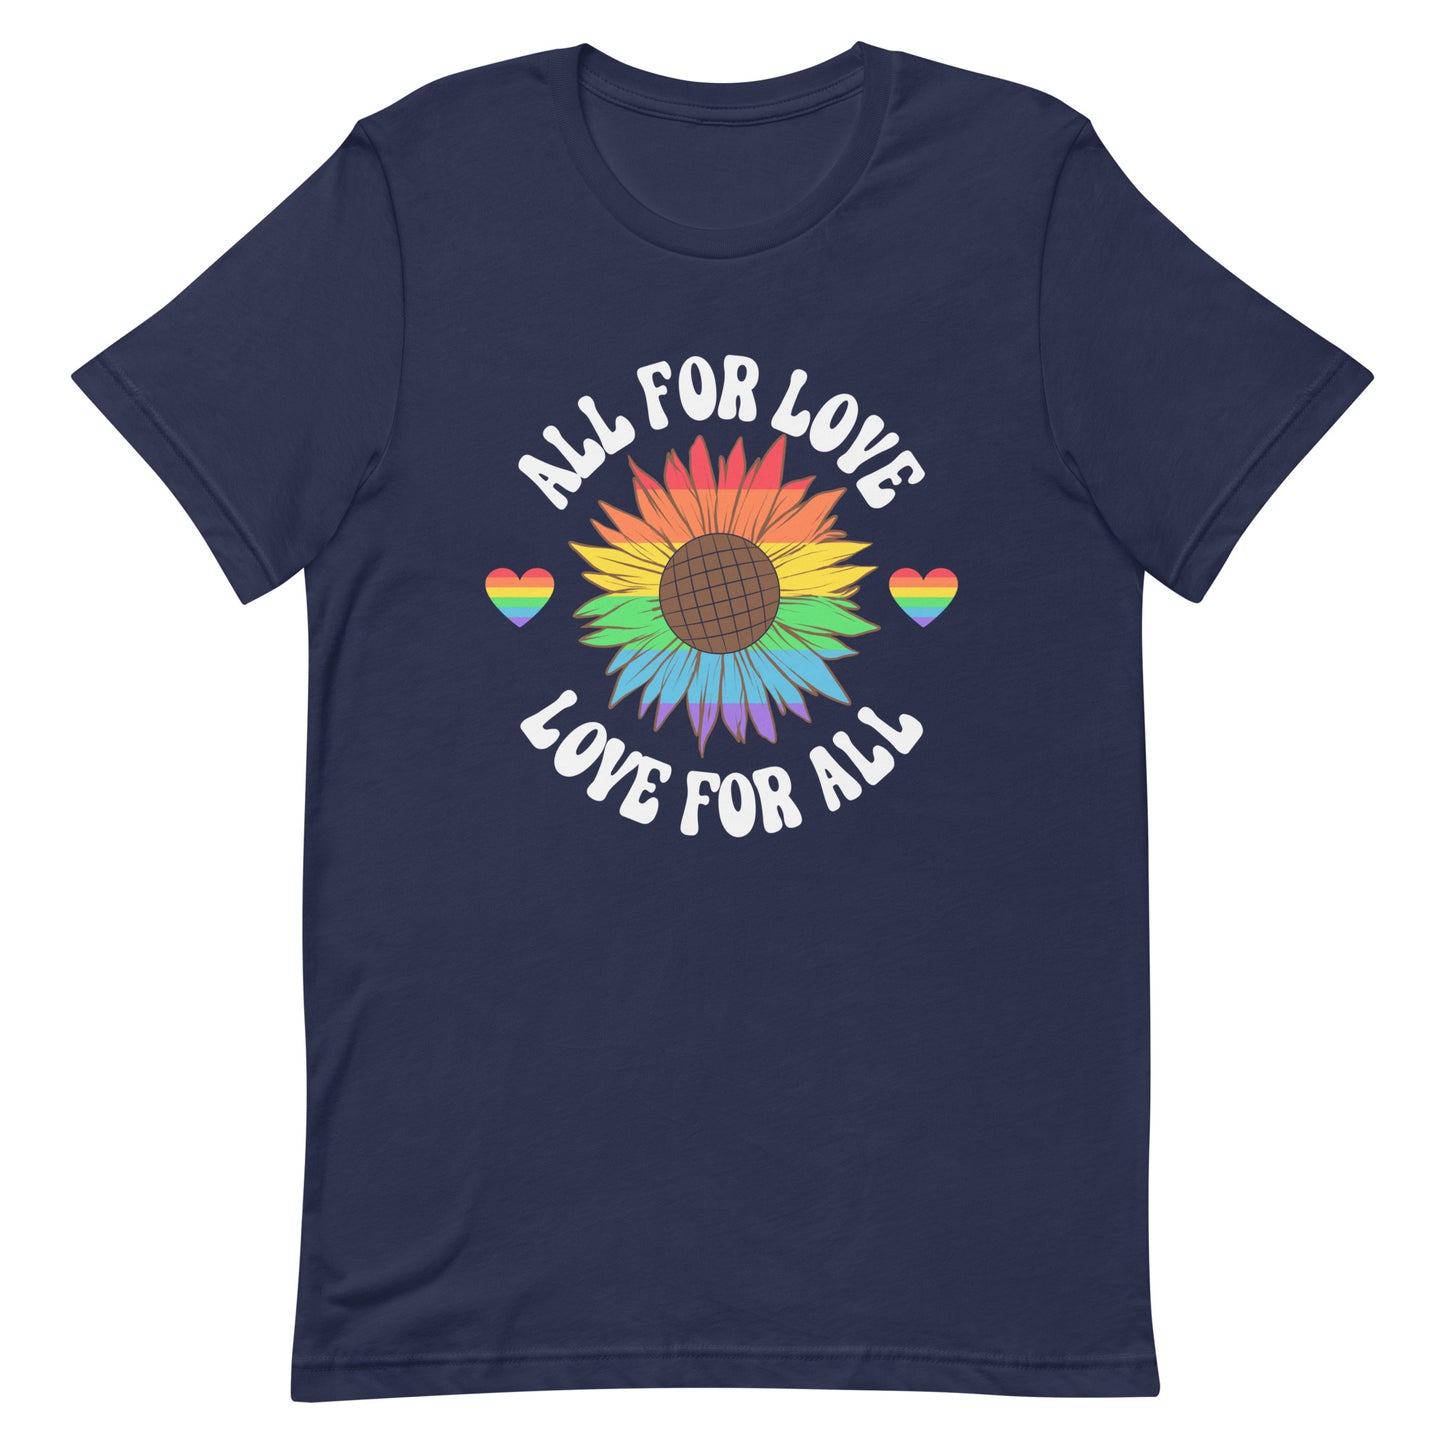 All For Love, Love for All Gay Pride T-Shirt - gay pride apparel